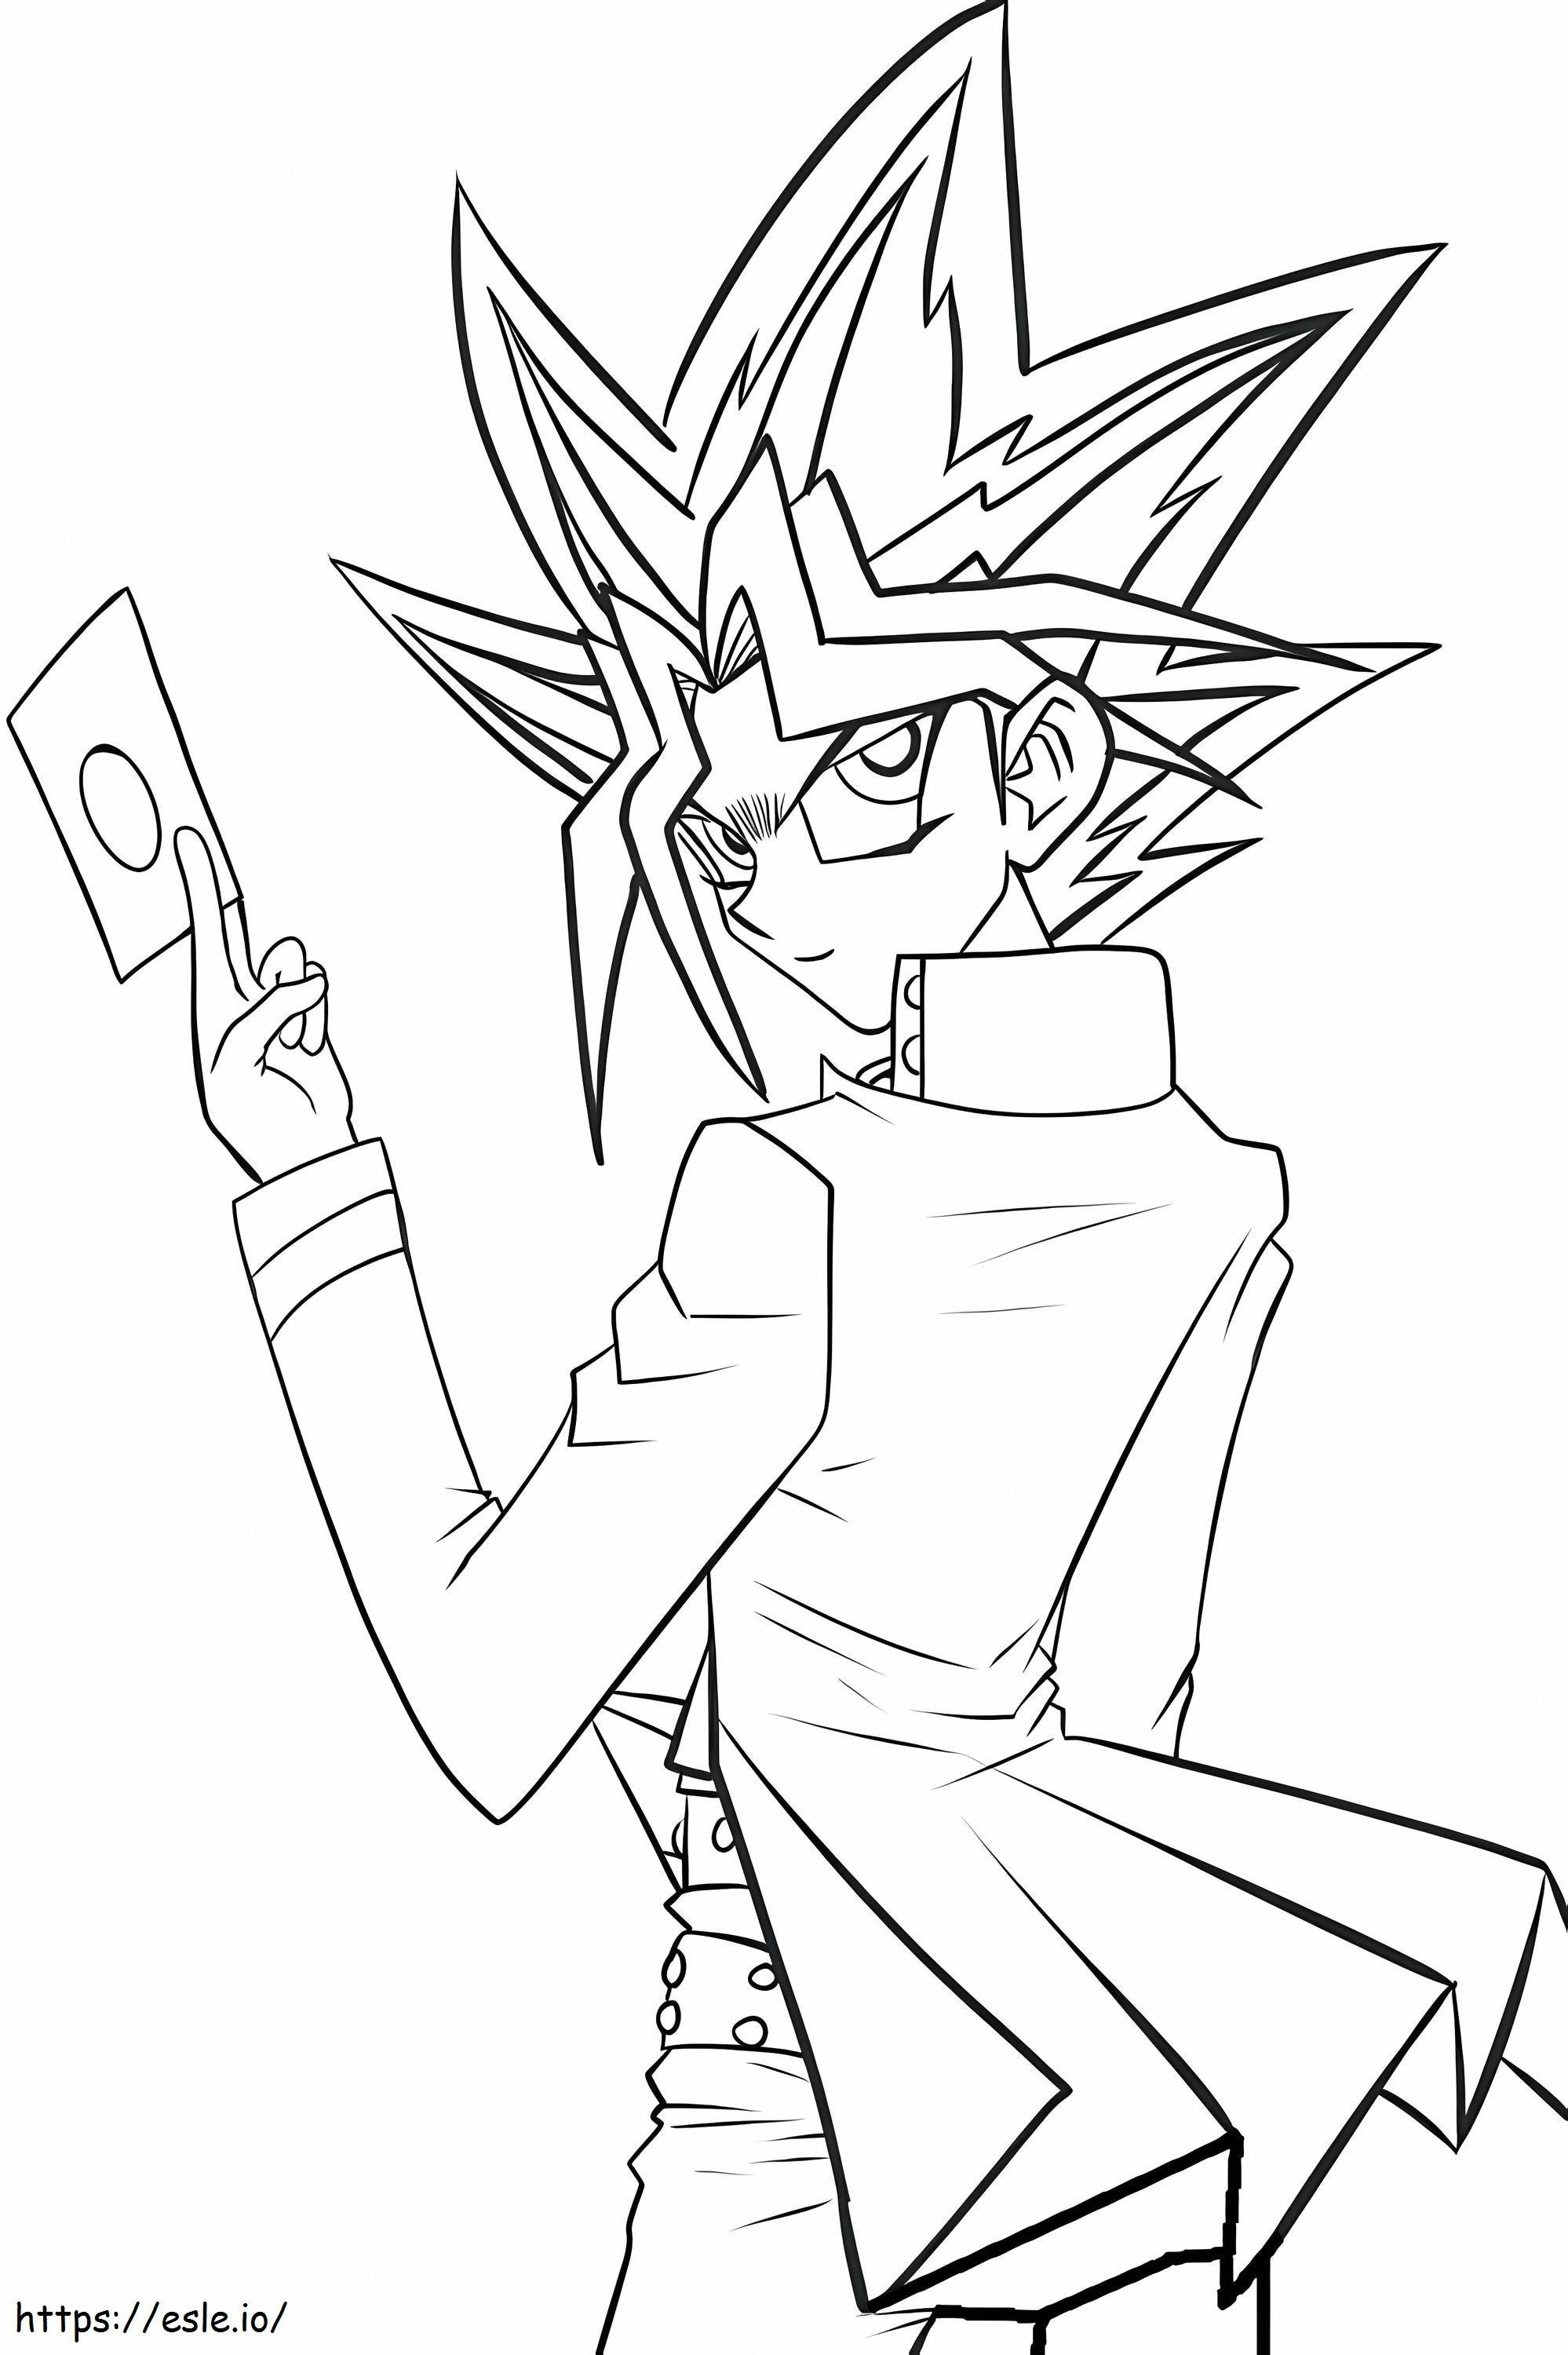 Yu Gi Oh coloring page